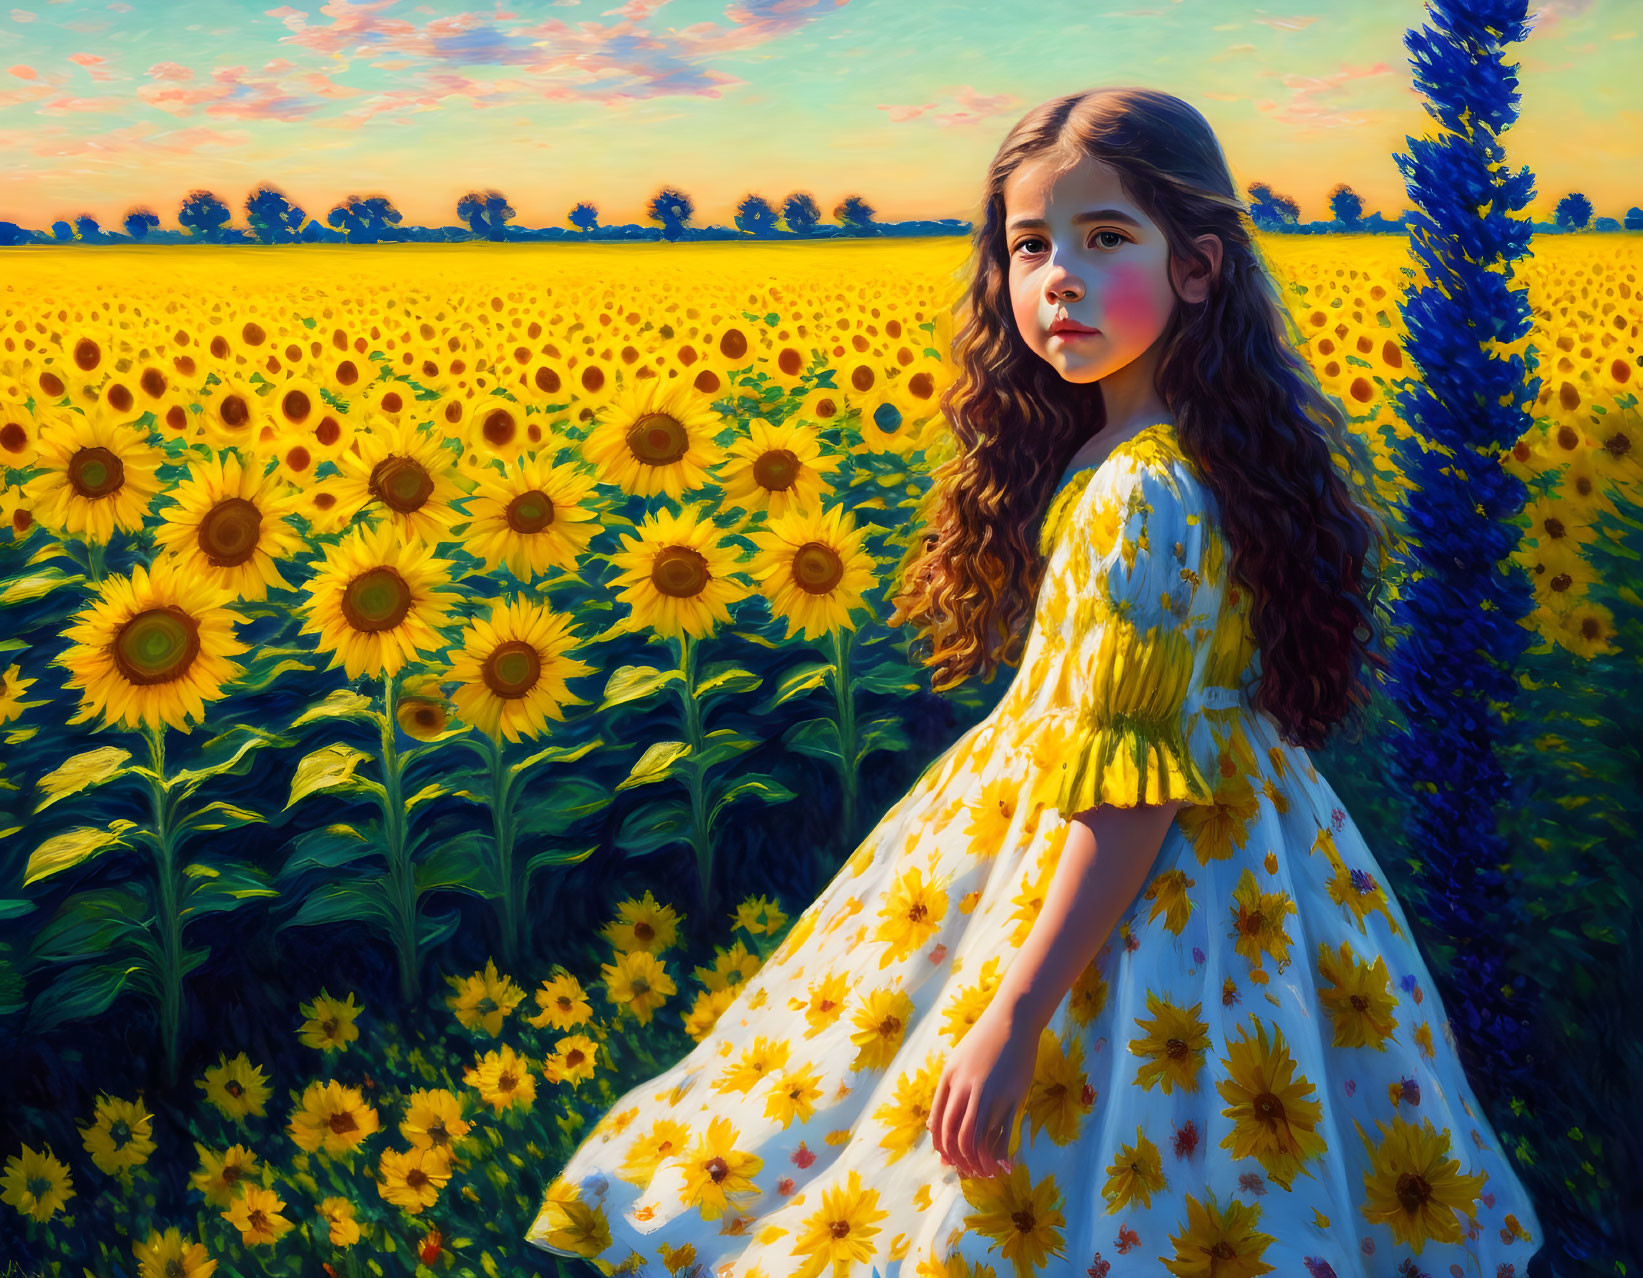 Young girl in yellow sunflower dress surrounded by blooming sunflowers and tall blue flowers under blue sky